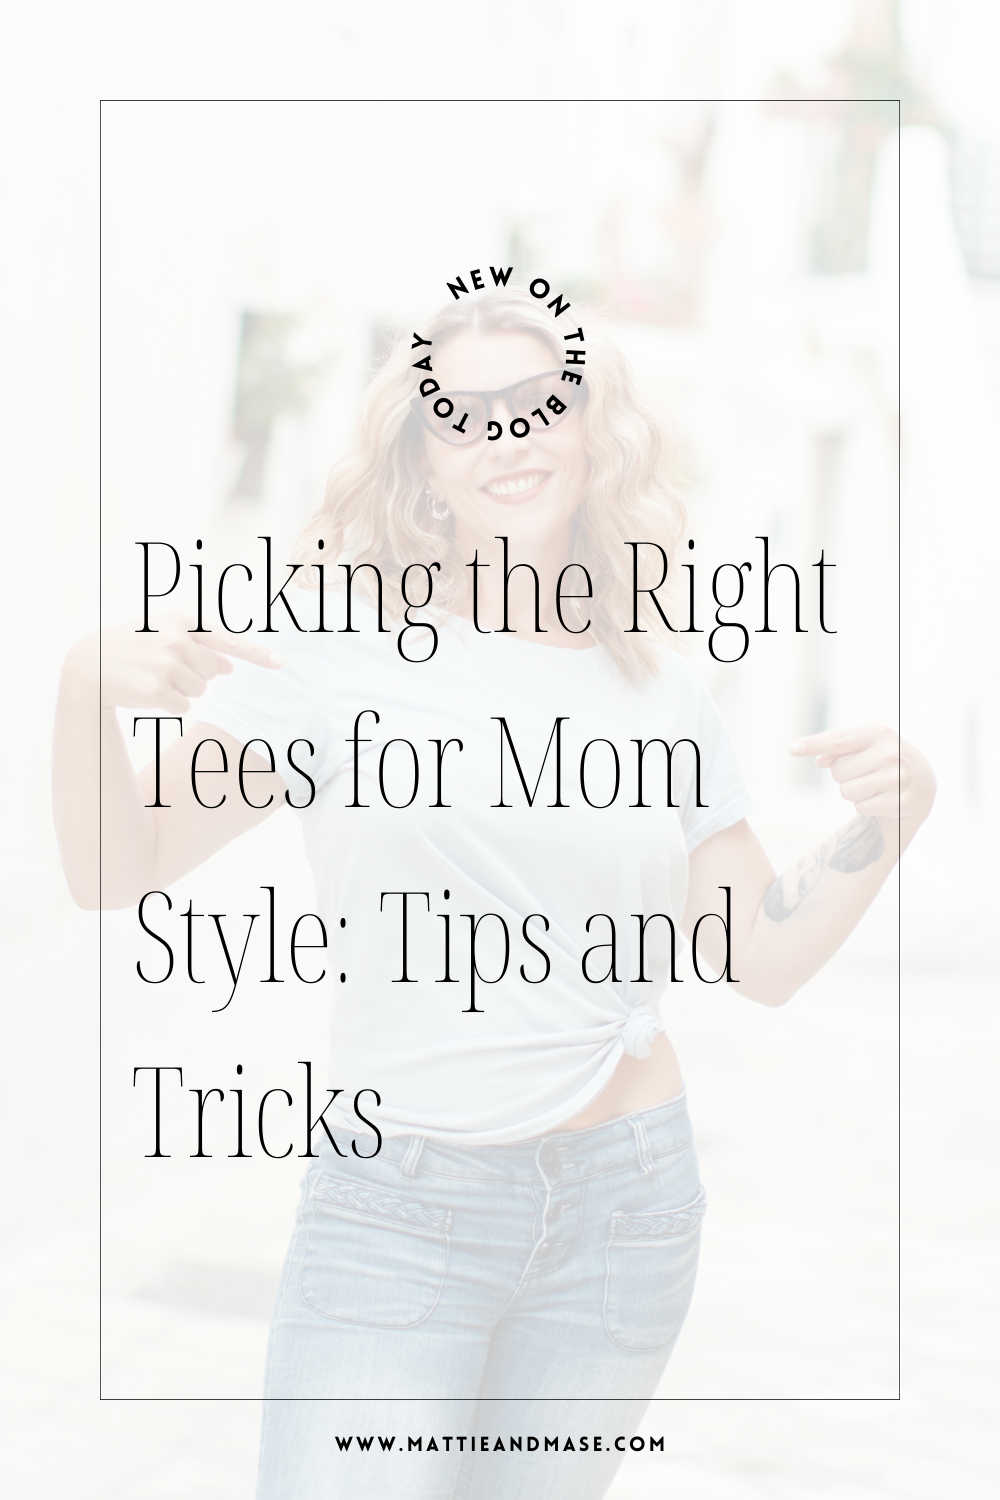 Picking the Right Tees for Mom Style: Tips and Tricks